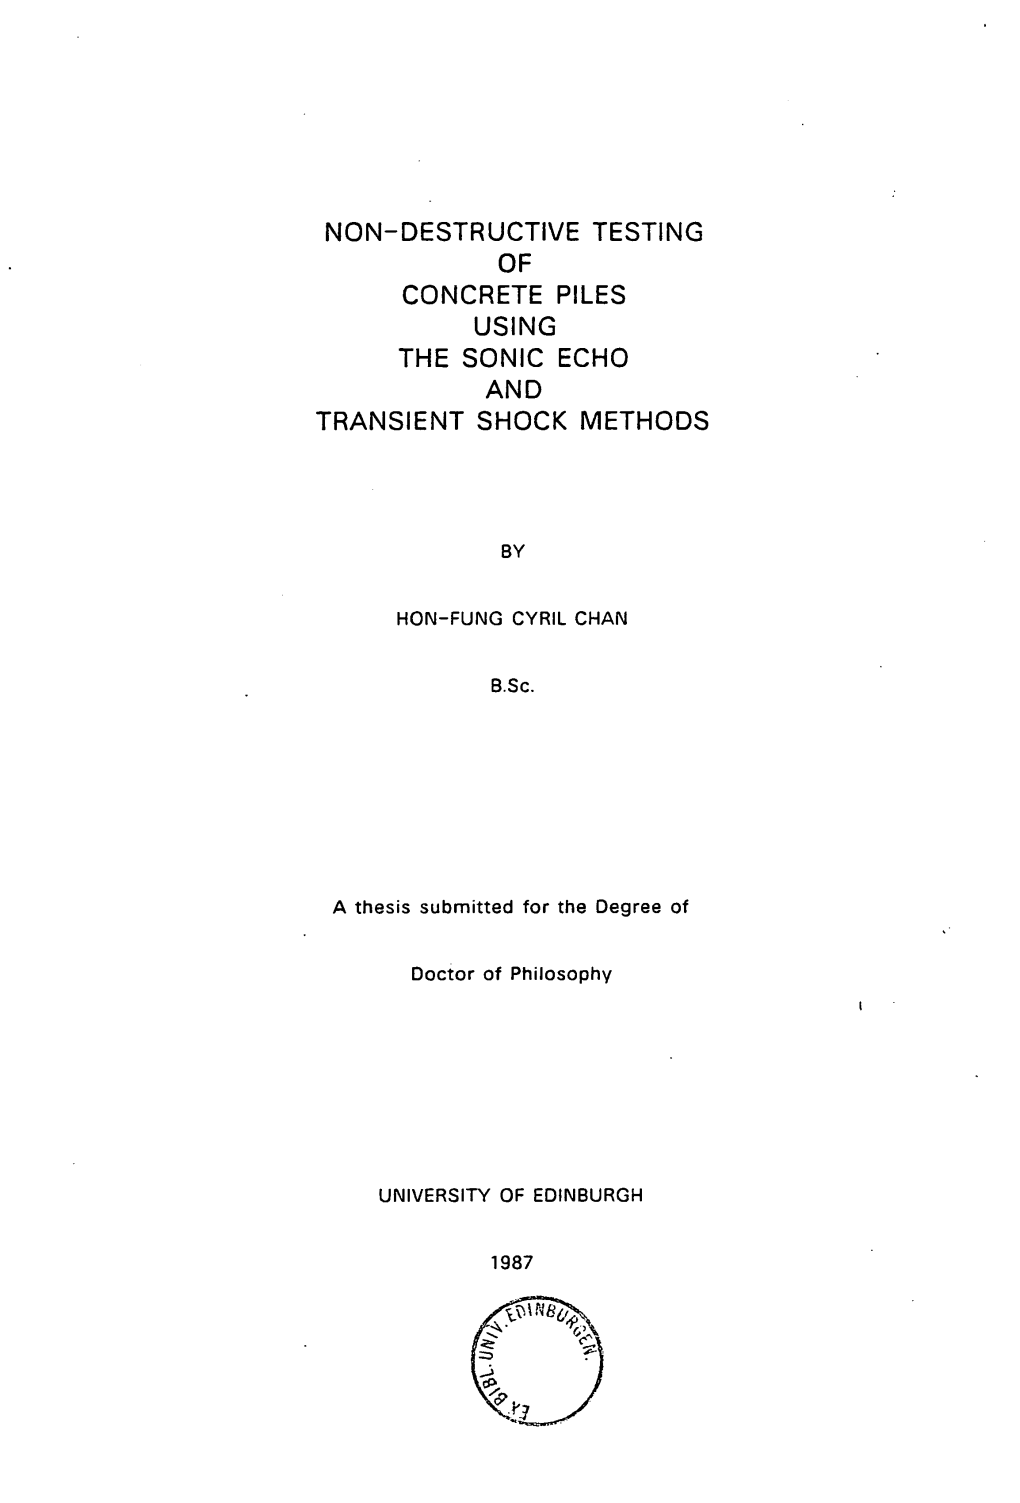 Non-Destructive Testing of Concrete Piles Using the Sonic Echo and Transient Shock Methods